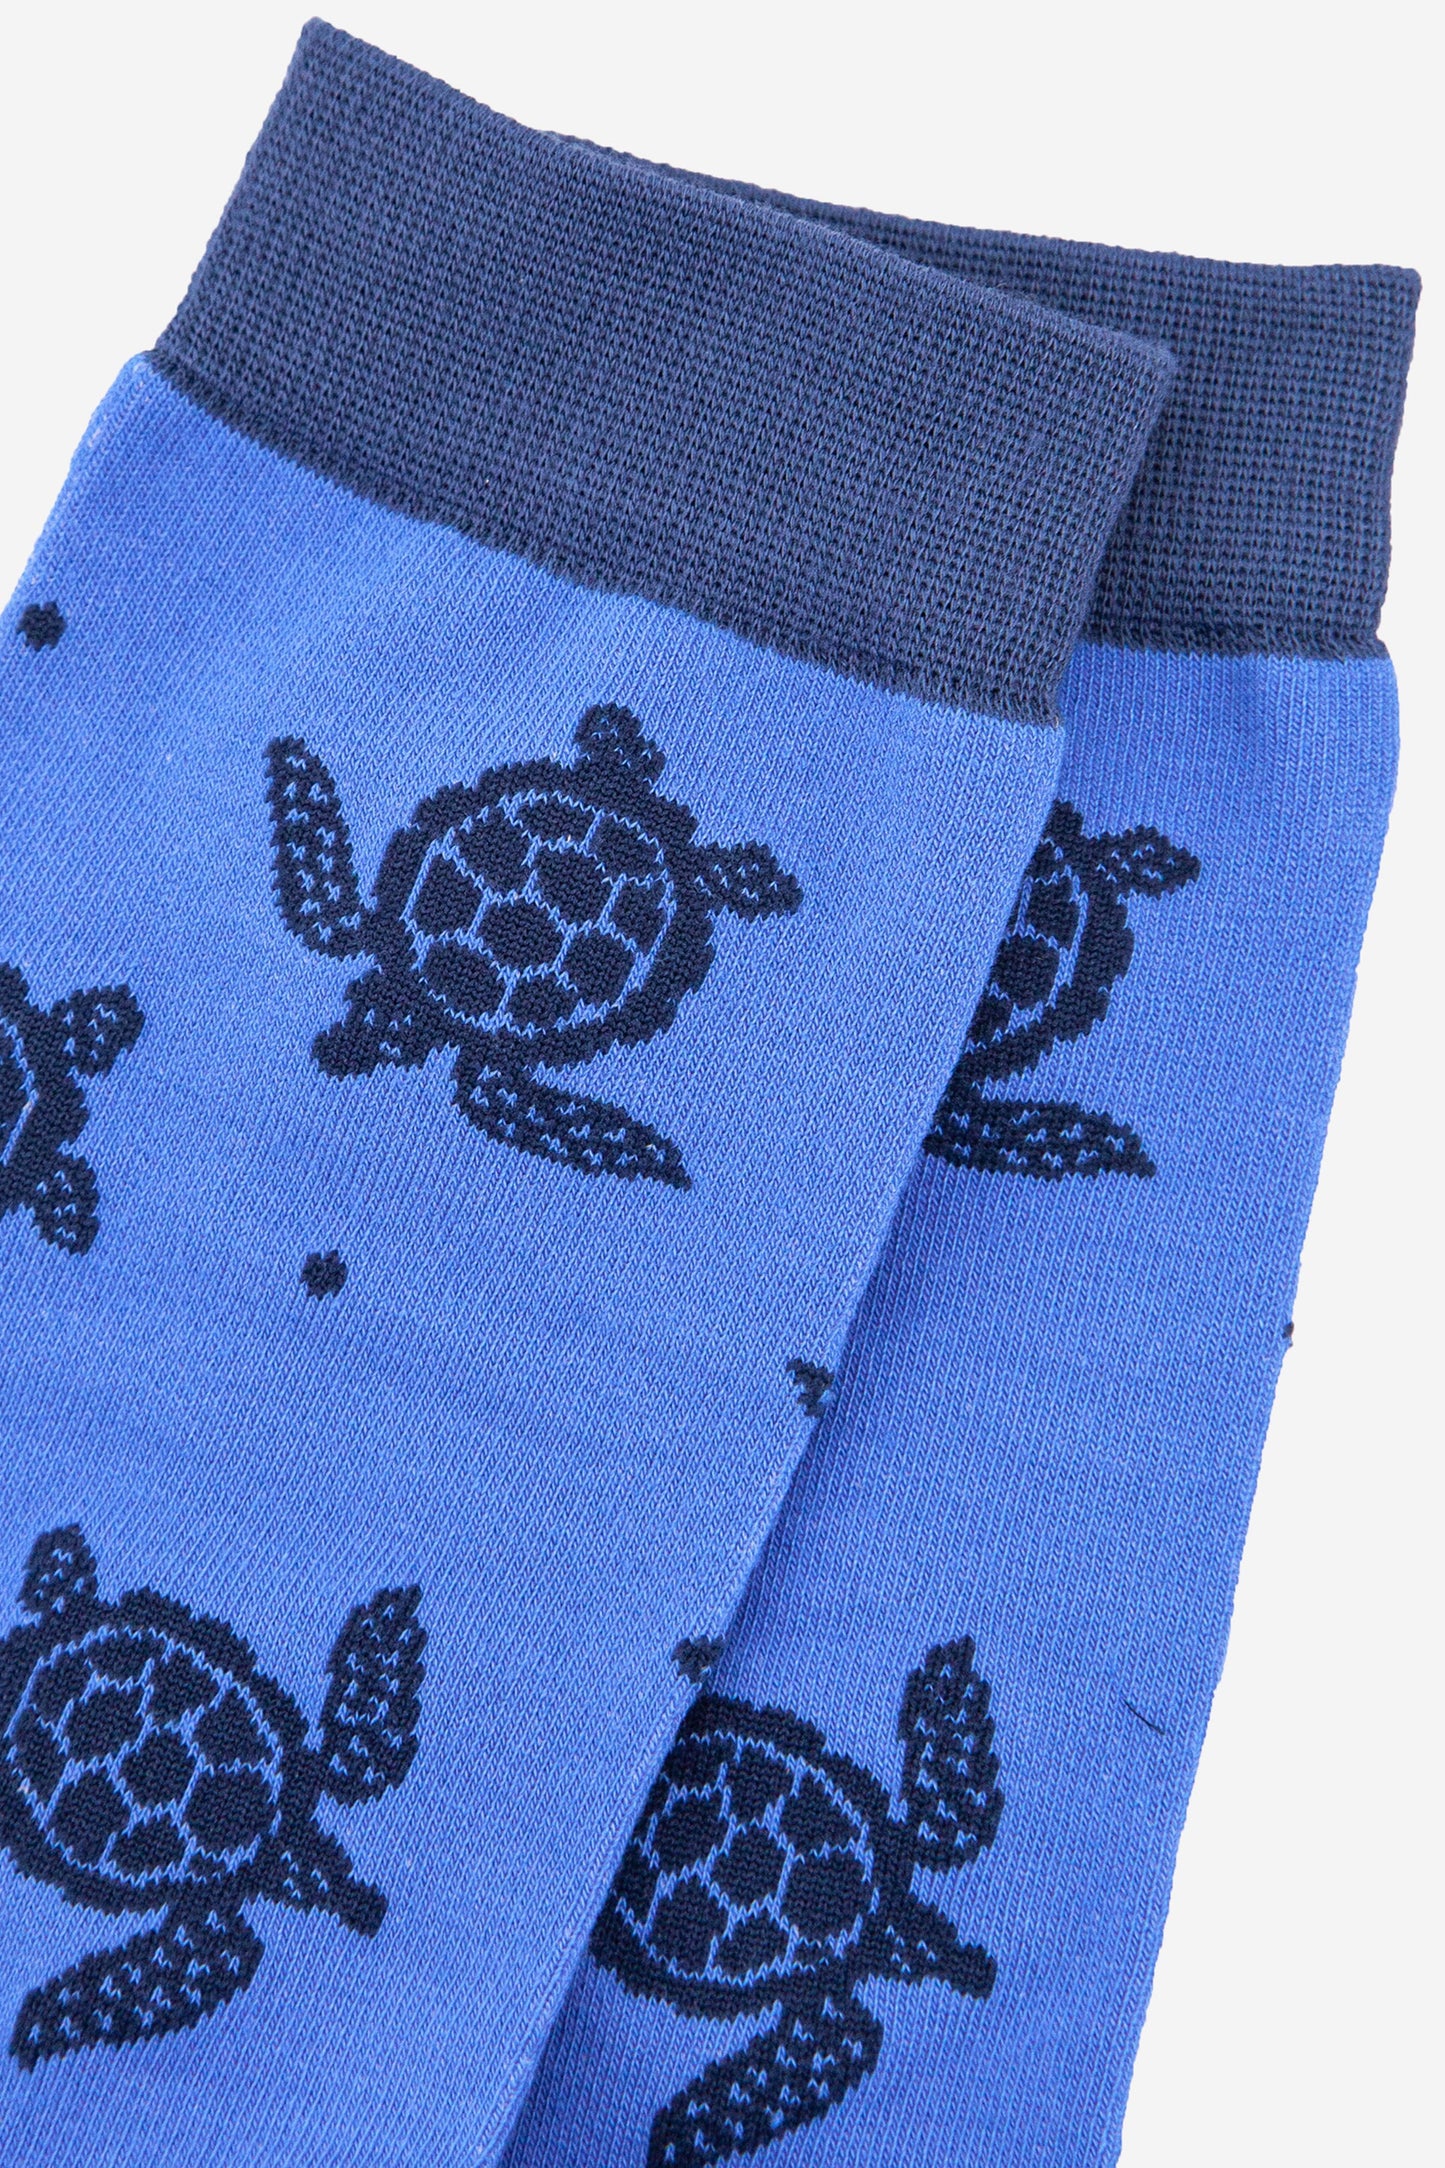 close up of the sea turtle pattern on the mens blue dress socks